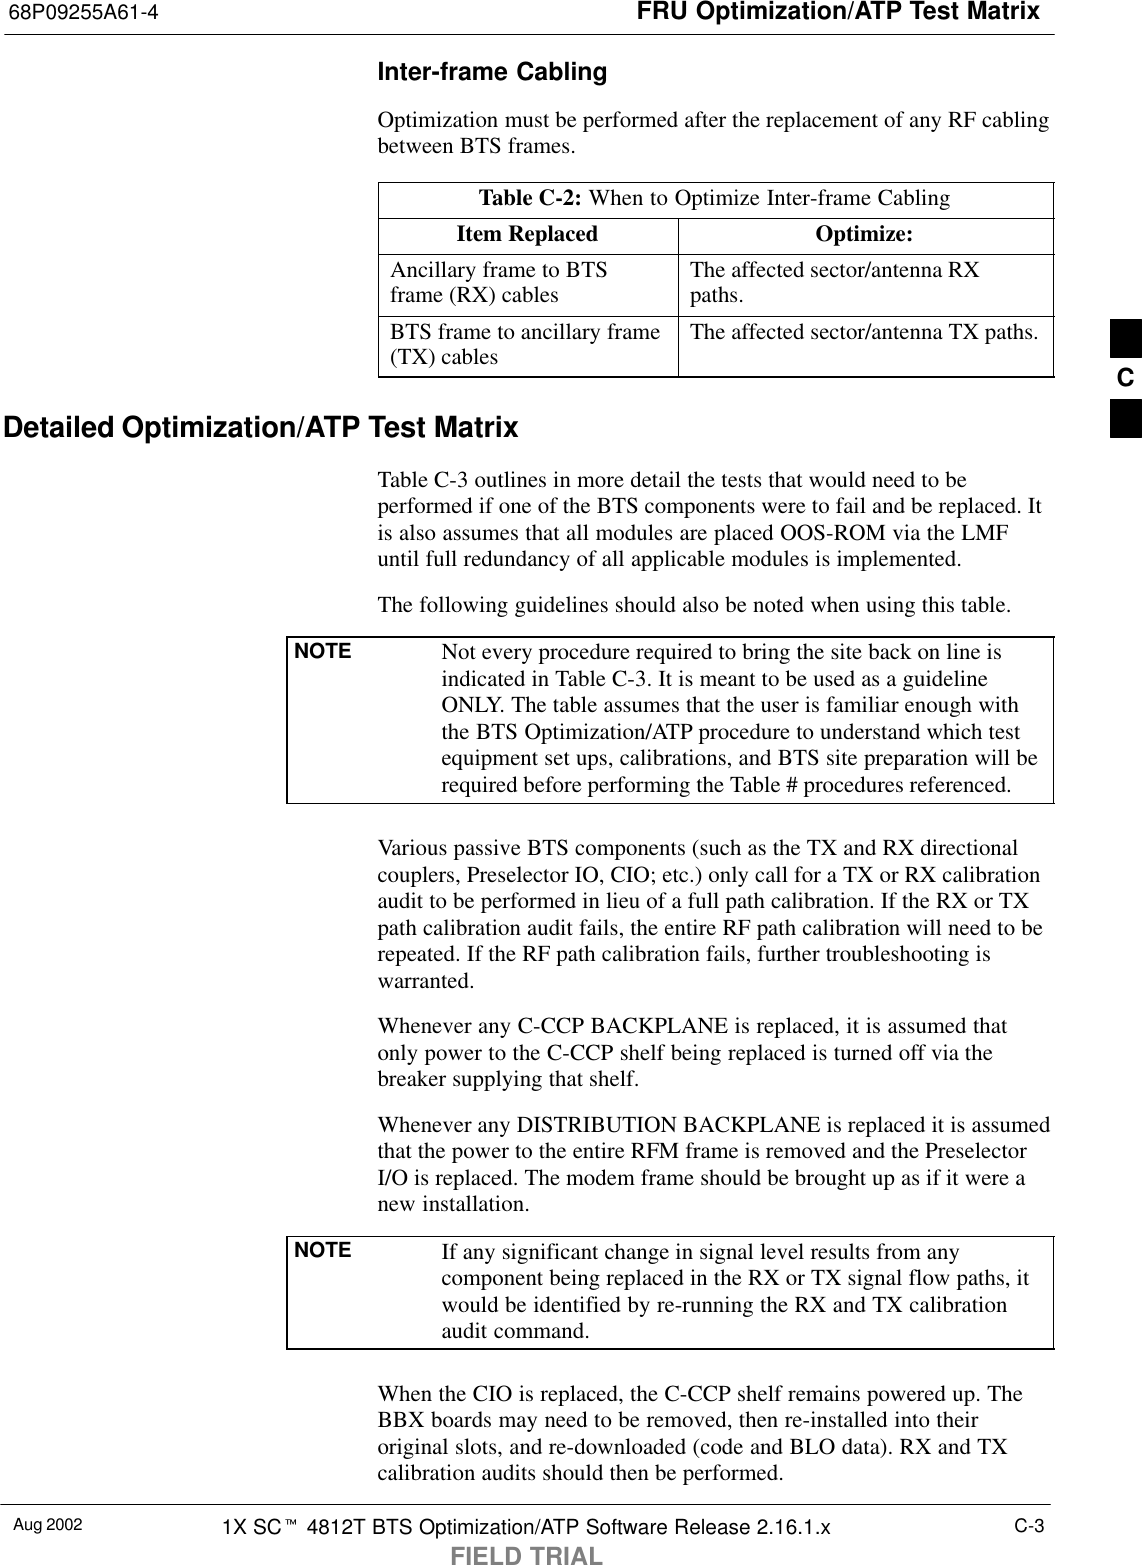 FRU Optimization/ATP Test Matrix68P09255A61-4Aug 2002 1X SCt 4812T BTS Optimization/ATP Software Release 2.16.1.xFIELD TRIALC-3Inter-frame CablingOptimization must be performed after the replacement of any RF cablingbetween BTS frames.Table C-2: When to Optimize Inter-frame CablingItem Replaced Optimize:Ancillary frame to BTSframe (RX) cables The affected sector/antenna RXpaths.BTS frame to ancillary frame(TX) cables The affected sector/antenna TX paths.Detailed Optimization/ATP Test MatrixTable C-3 outlines in more detail the tests that would need to beperformed if one of the BTS components were to fail and be replaced. Itis also assumes that all modules are placed OOS-ROM via the LMFuntil full redundancy of all applicable modules is implemented.The following guidelines should also be noted when using this table.NOTE Not every procedure required to bring the site back on line isindicated in Table C-3. It is meant to be used as a guidelineONLY. The table assumes that the user is familiar enough withthe BTS Optimization/ATP procedure to understand which testequipment set ups, calibrations, and BTS site preparation will berequired before performing the Table # procedures referenced.Various passive BTS components (such as the TX and RX directionalcouplers, Preselector IO, CIO; etc.) only call for a TX or RX calibrationaudit to be performed in lieu of a full path calibration. If the RX or TXpath calibration audit fails, the entire RF path calibration will need to berepeated. If the RF path calibration fails, further troubleshooting iswarranted.Whenever any C-CCP BACKPLANE is replaced, it is assumed thatonly power to the C-CCP shelf being replaced is turned off via thebreaker supplying that shelf.Whenever any DISTRIBUTION BACKPLANE is replaced it is assumedthat the power to the entire RFM frame is removed and the PreselectorI/O is replaced. The modem frame should be brought up as if it were anew installation.NOTE If any significant change in signal level results from anycomponent being replaced in the RX or TX signal flow paths, itwould be identified by re-running the RX and TX calibrationaudit command.When the CIO is replaced, the C-CCP shelf remains powered up. TheBBX boards may need to be removed, then re-installed into theiroriginal slots, and re-downloaded (code and BLO data). RX and TXcalibration audits should then be performed.C